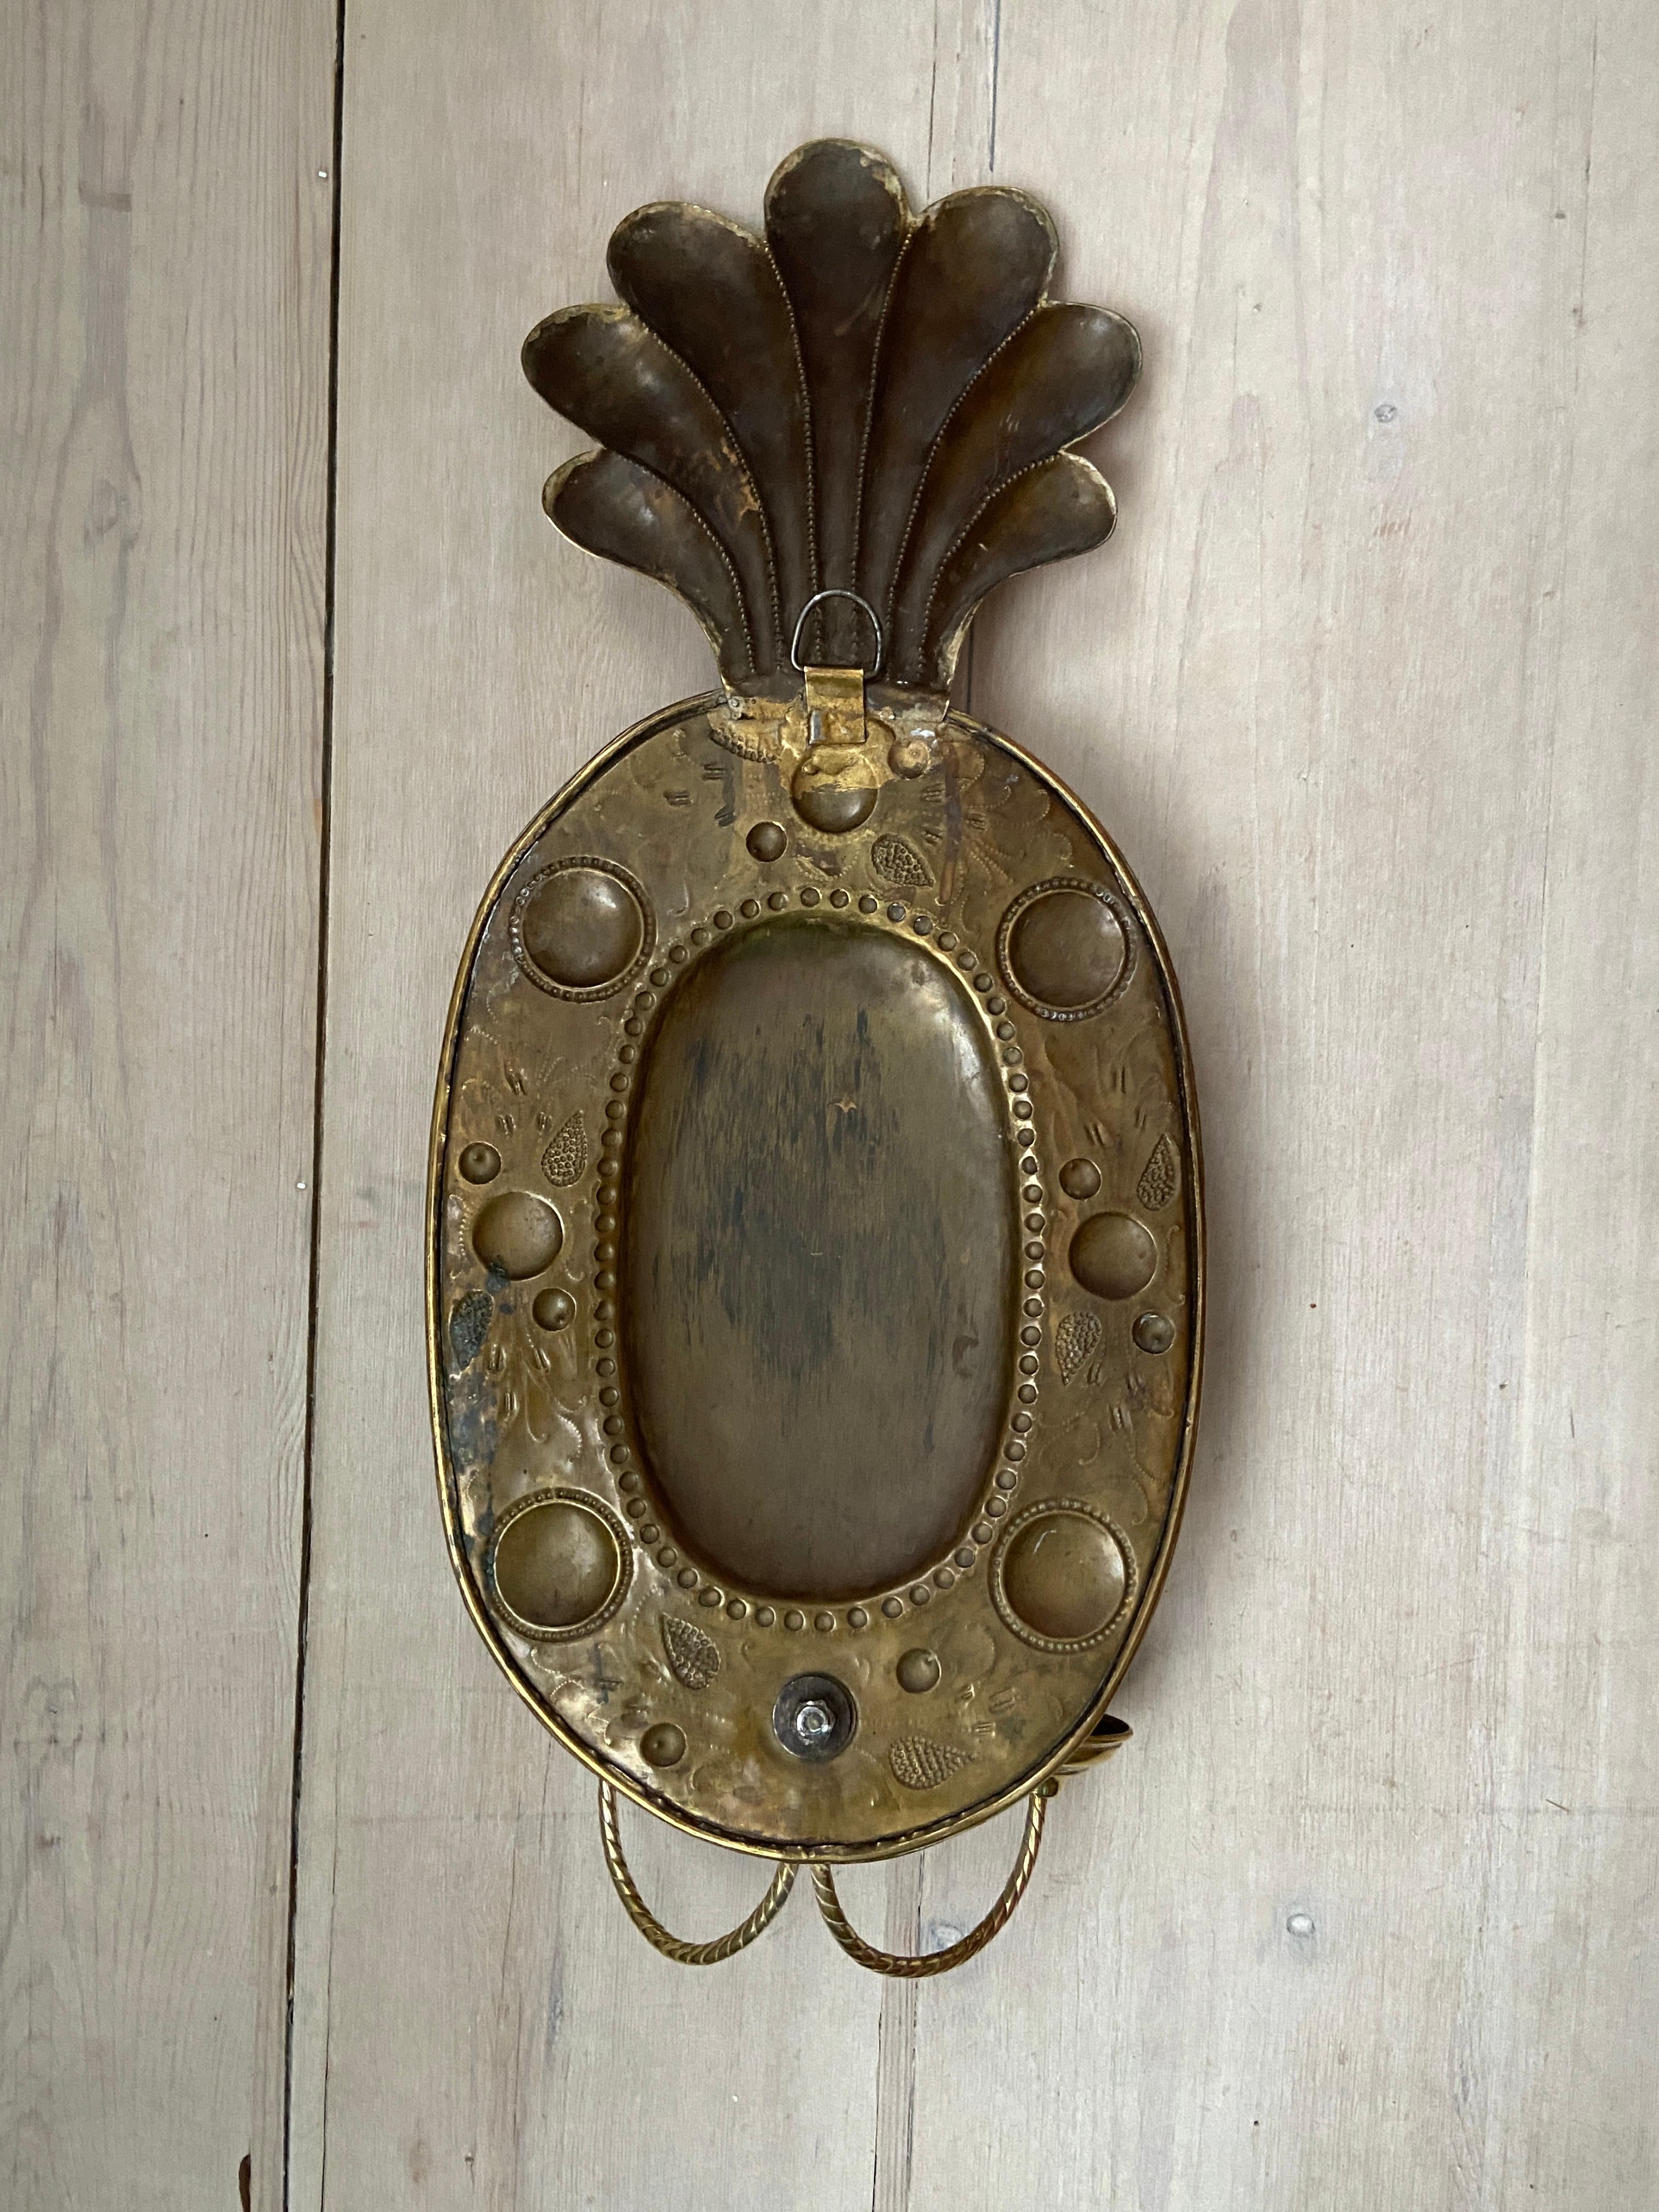 Vintage Pair of Large Sculptural Brass Wall Sconces, Sweden, Late 19th Century For Sale 5